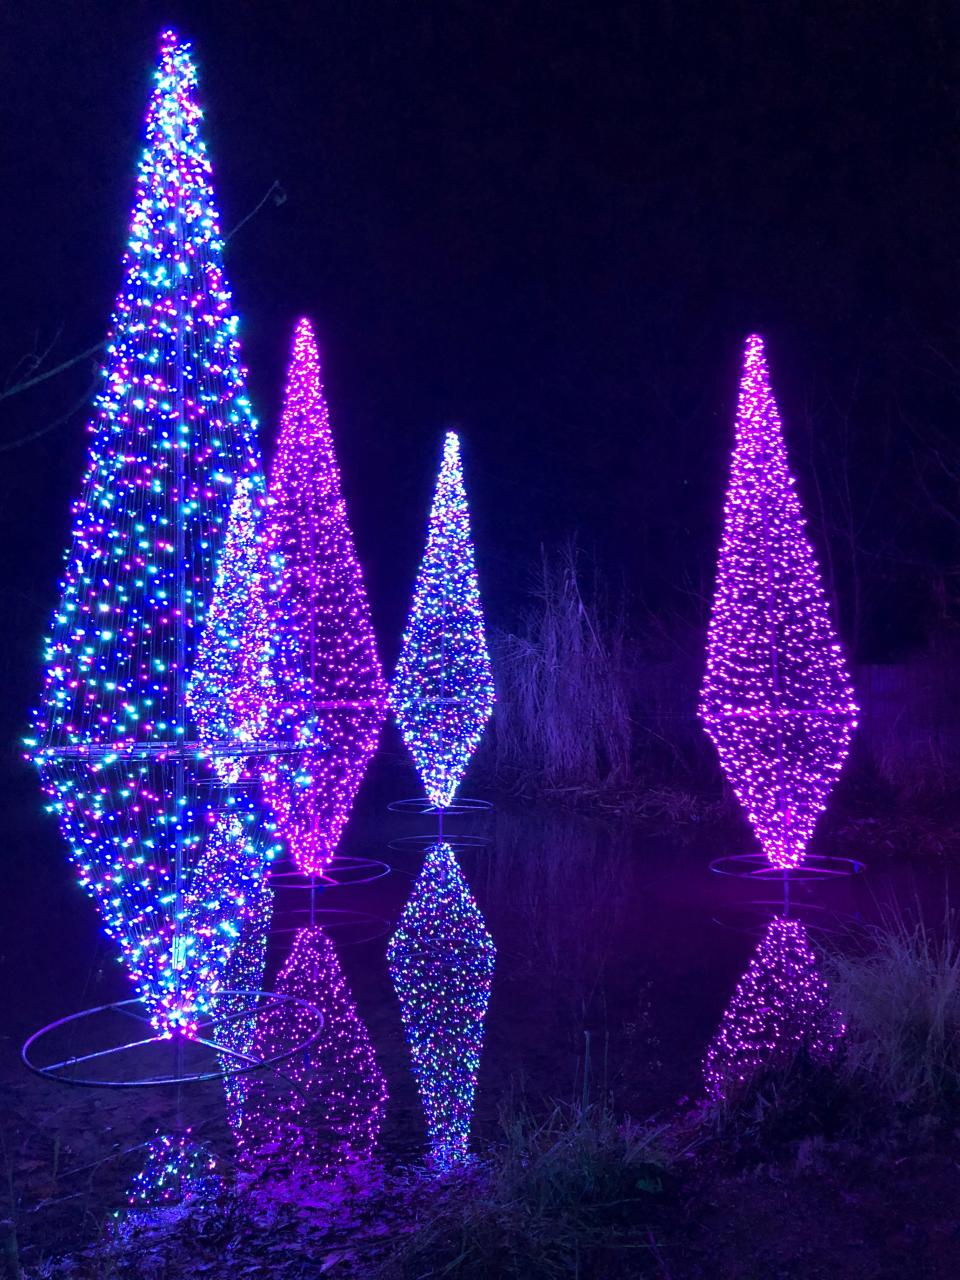 Fernwood Botanic Gardens brings back a light display that debuted in 2021, including these geometric trees reflected in a pond.